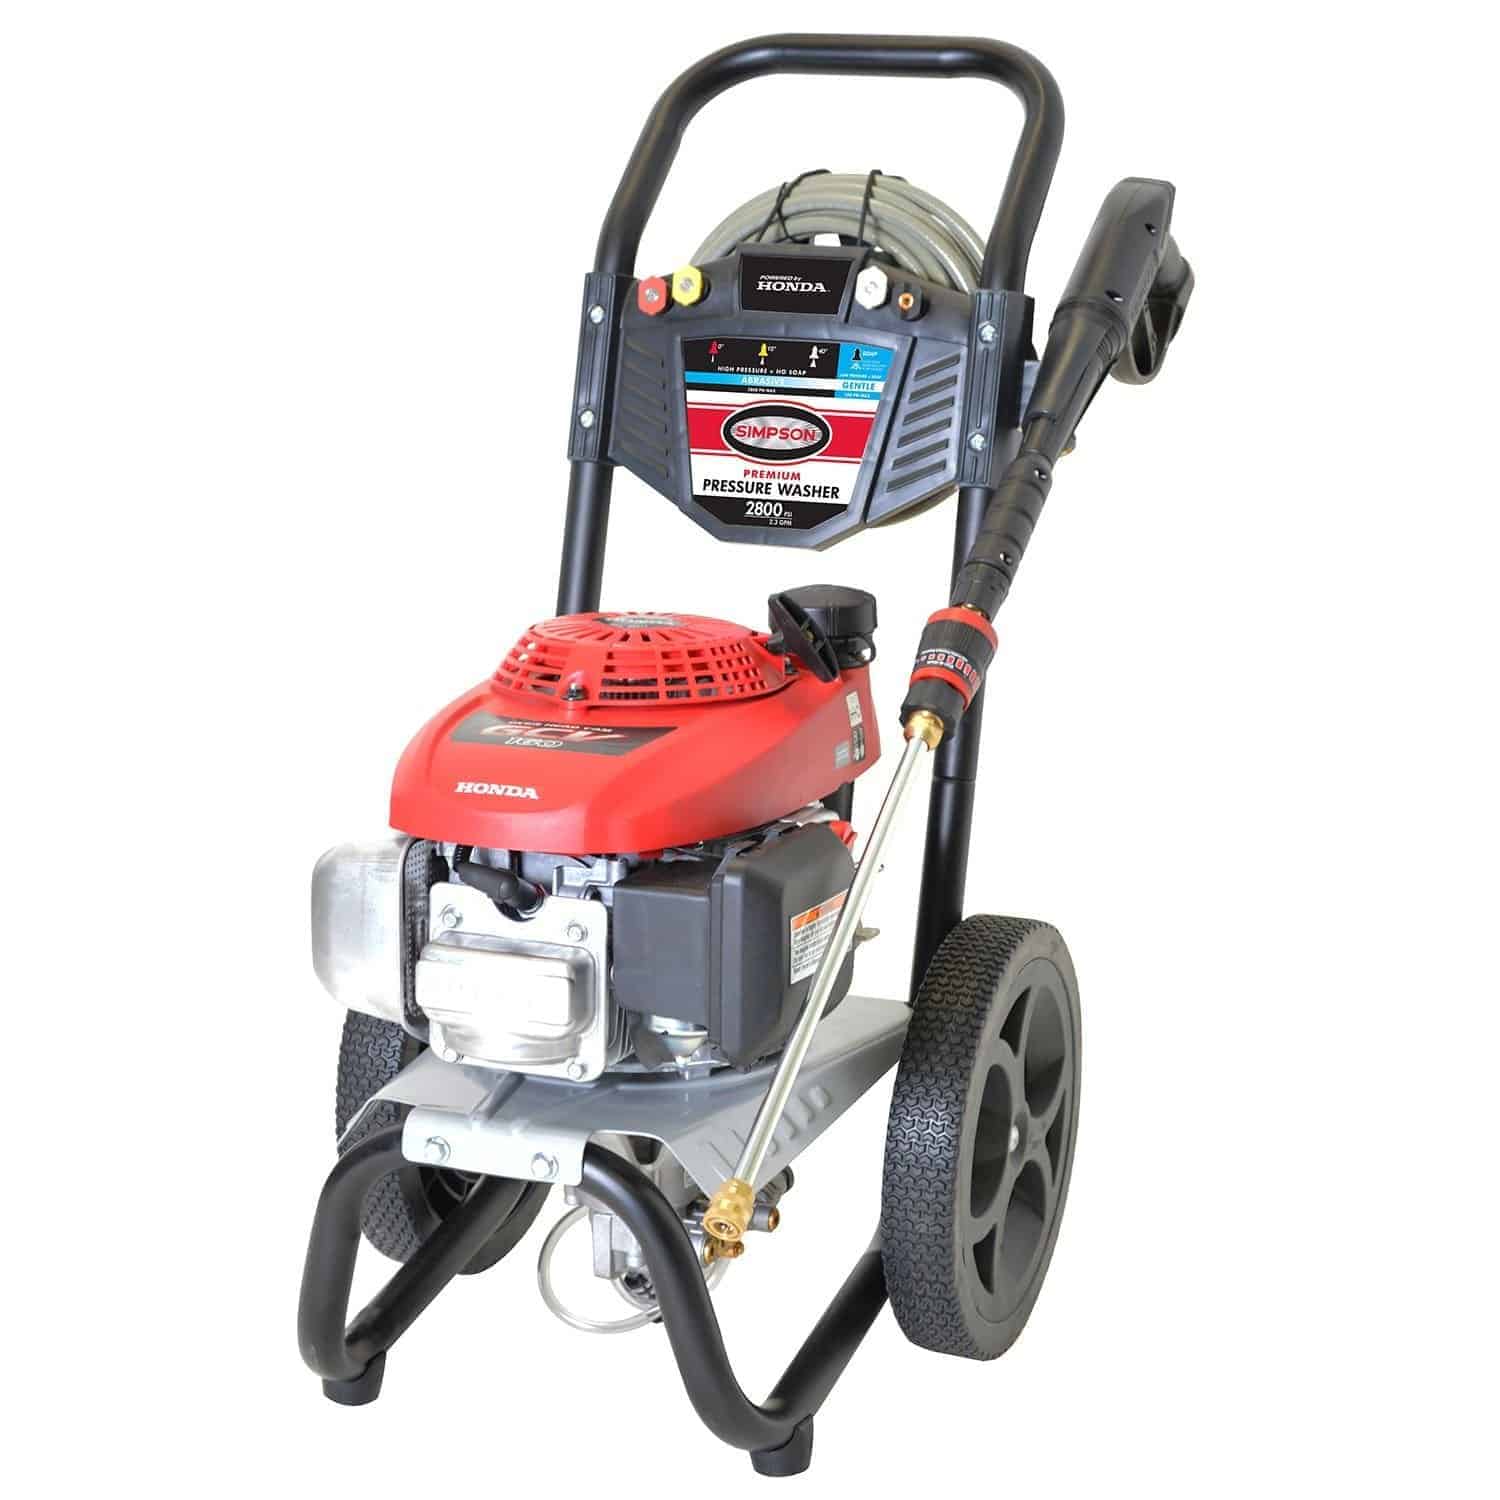 Simpson MegaShot 2800 PSI 2.3 GPM Gas Pressure Washer Powered by HONDA GCV160 review